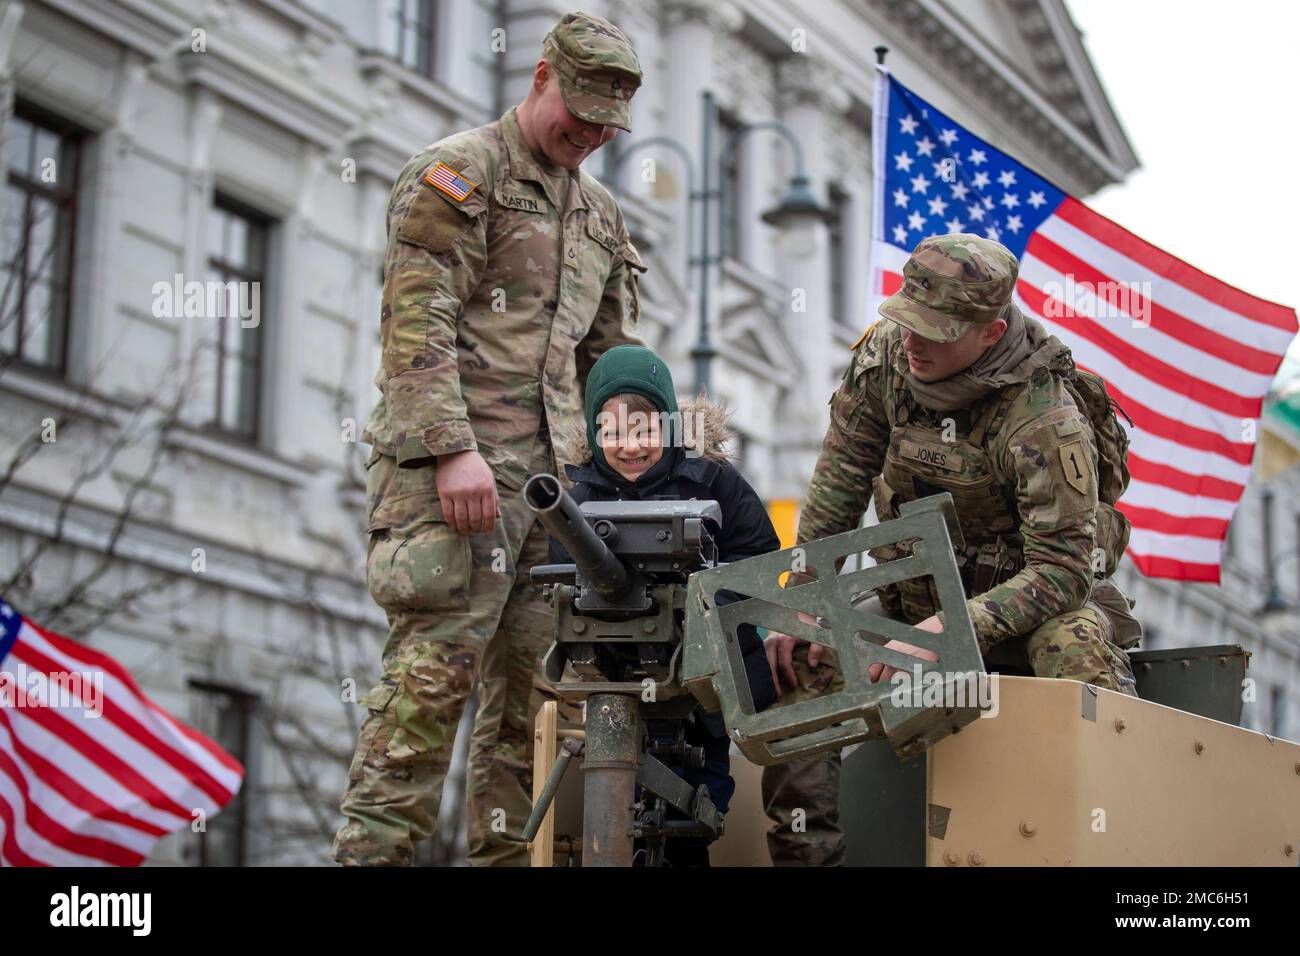 Members of the U.S. Army show a gun to a young boy on the armored vehicle  during the meeting with local residents at the Lukiskes square in Vilnius,  Lithuania, Wednesday, Feb. 16,